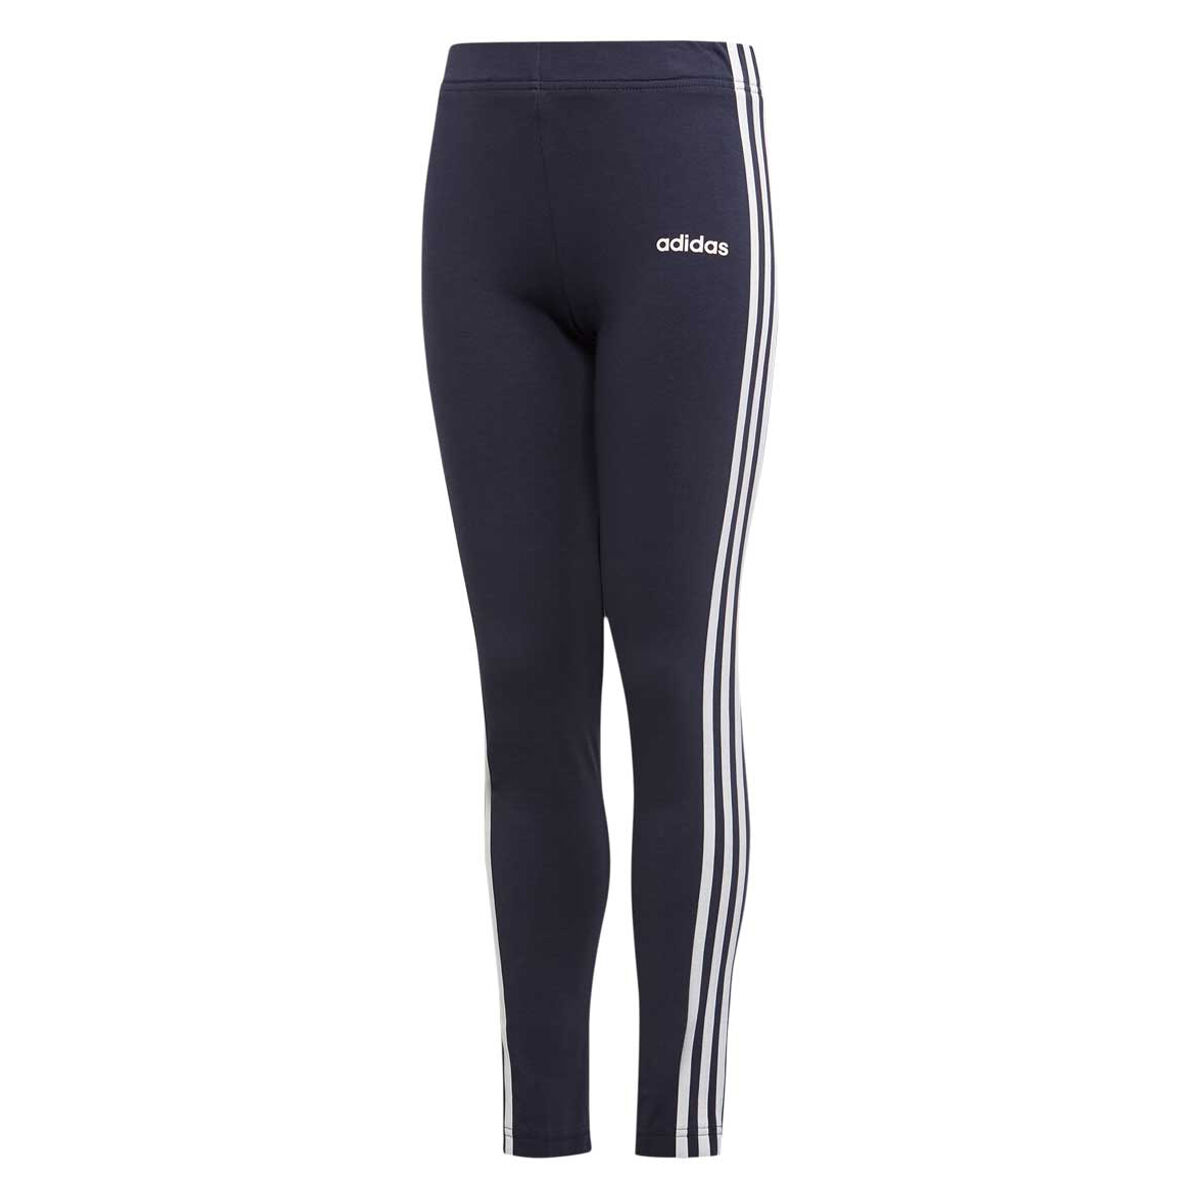 adidas ultimate fit 3 striped tights